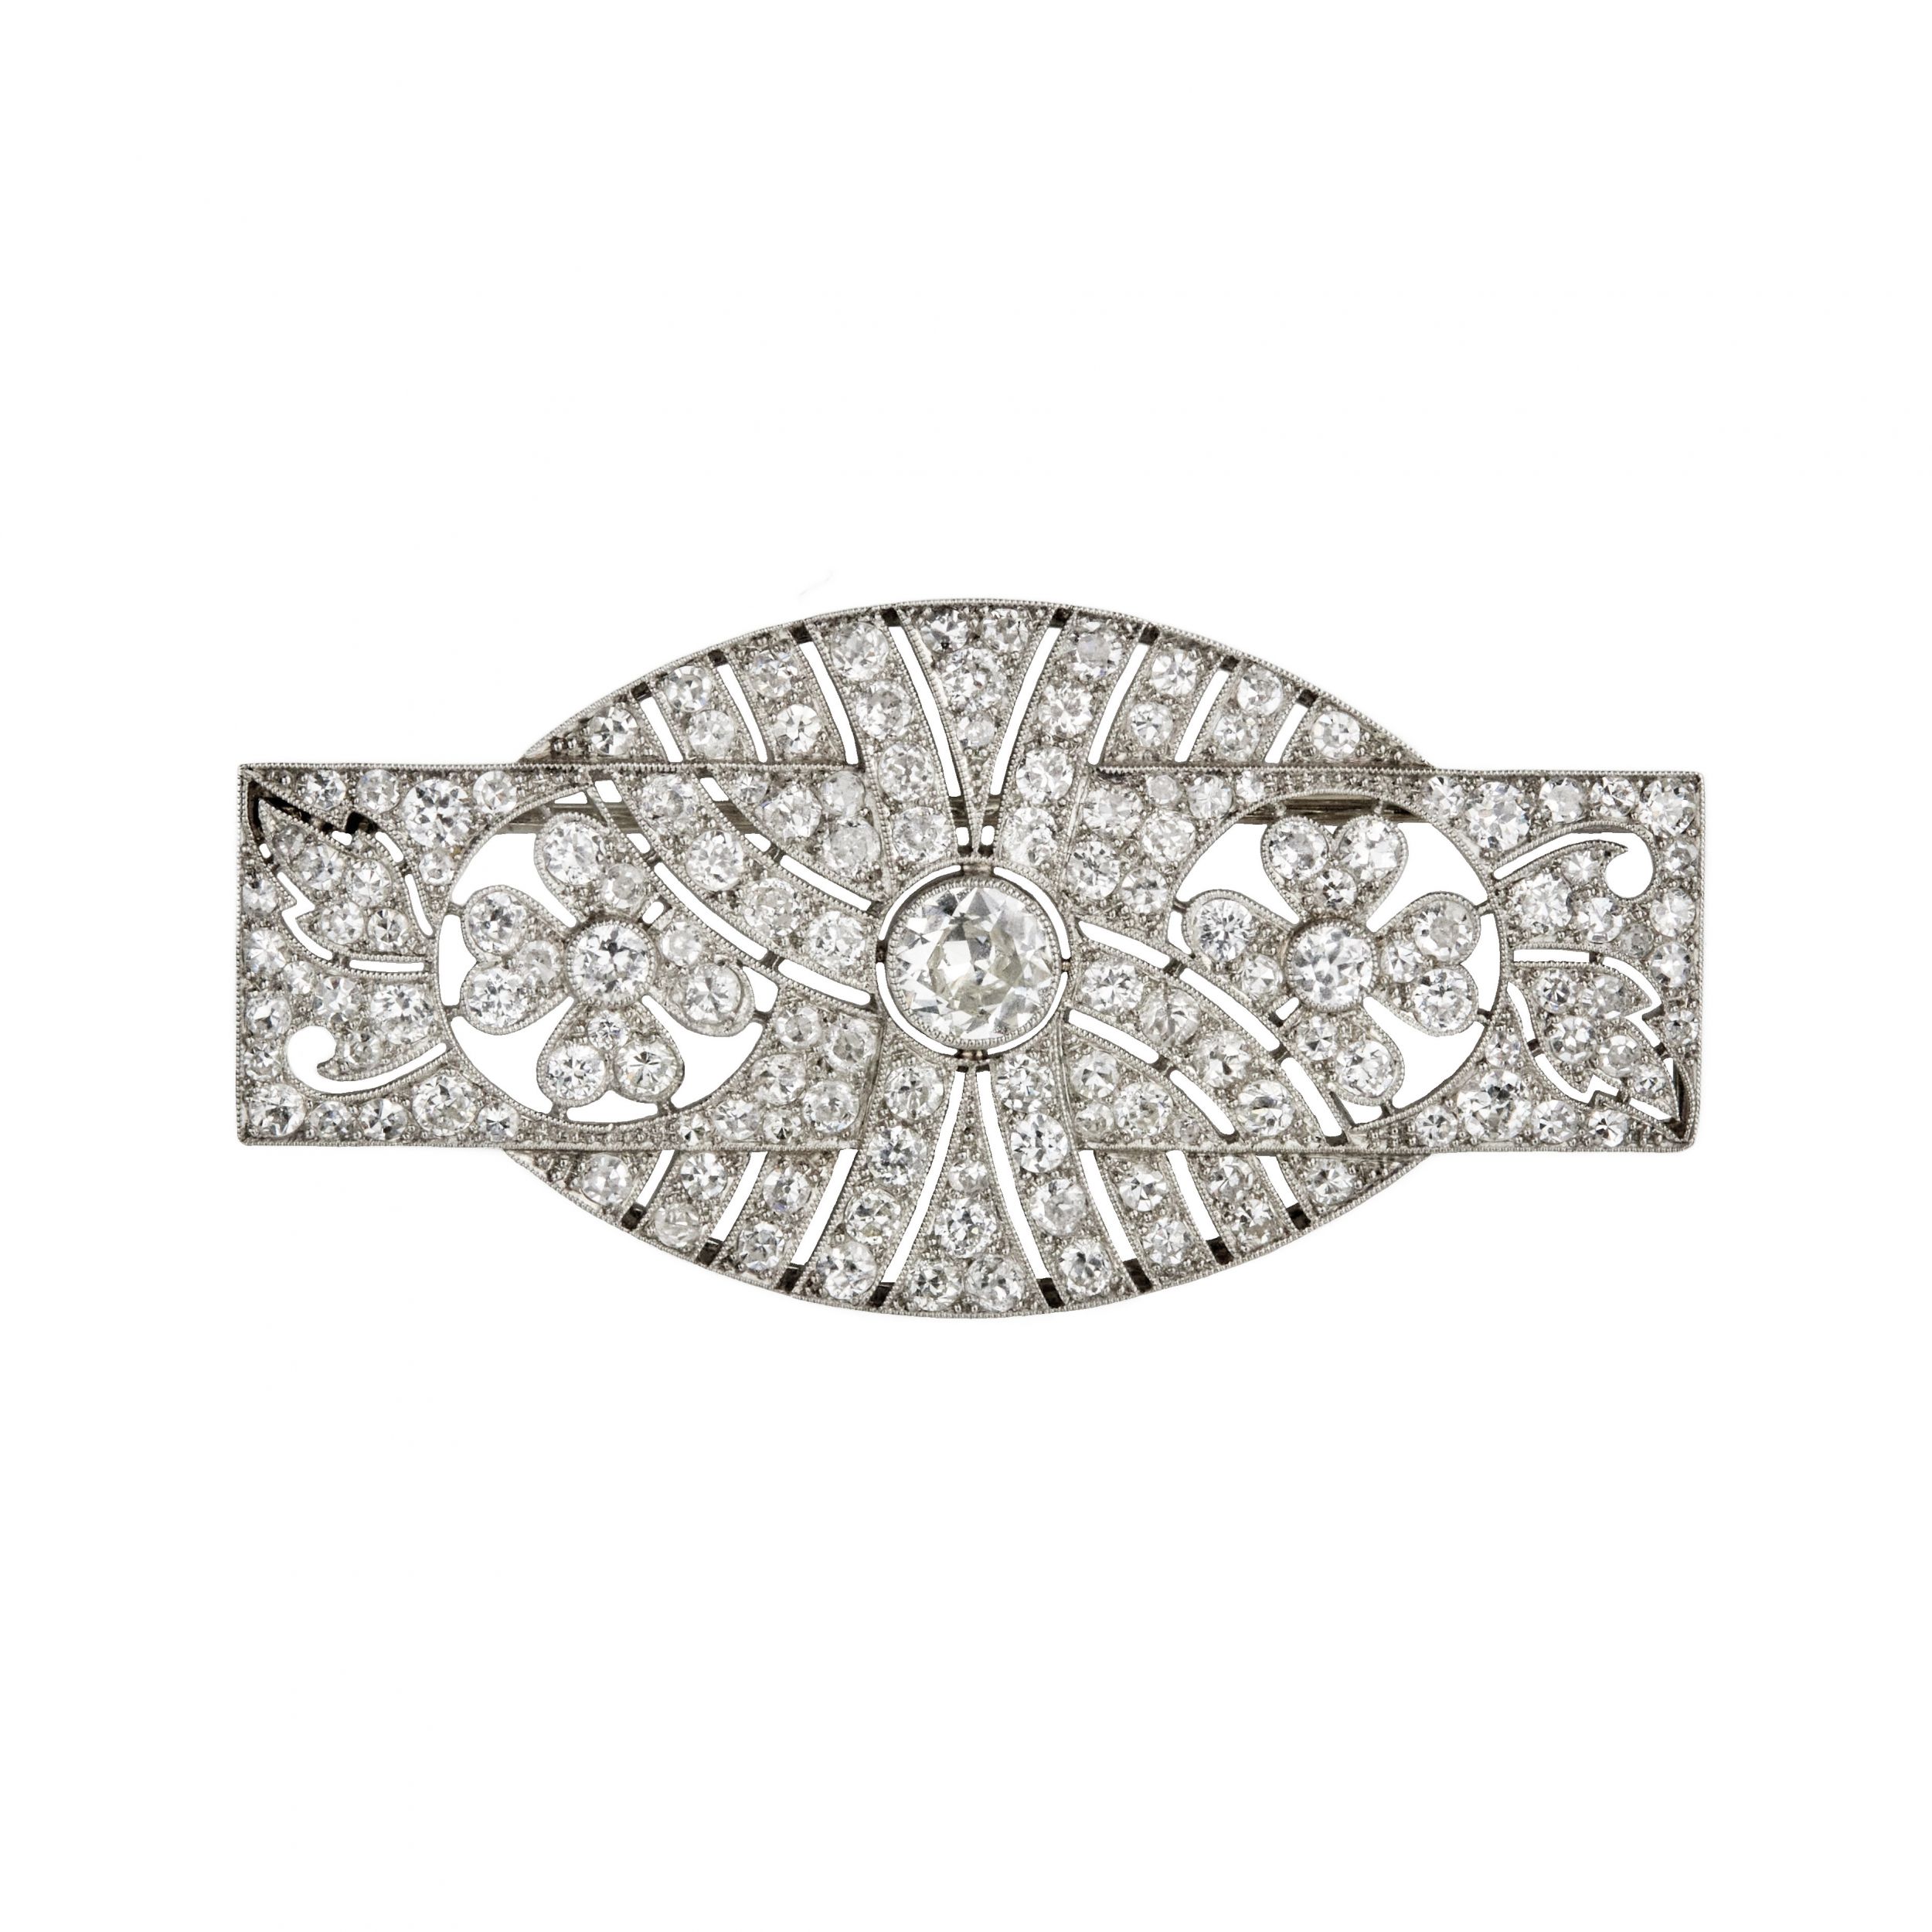 Brooch-with-diamonds-in-Art-Deco-style-